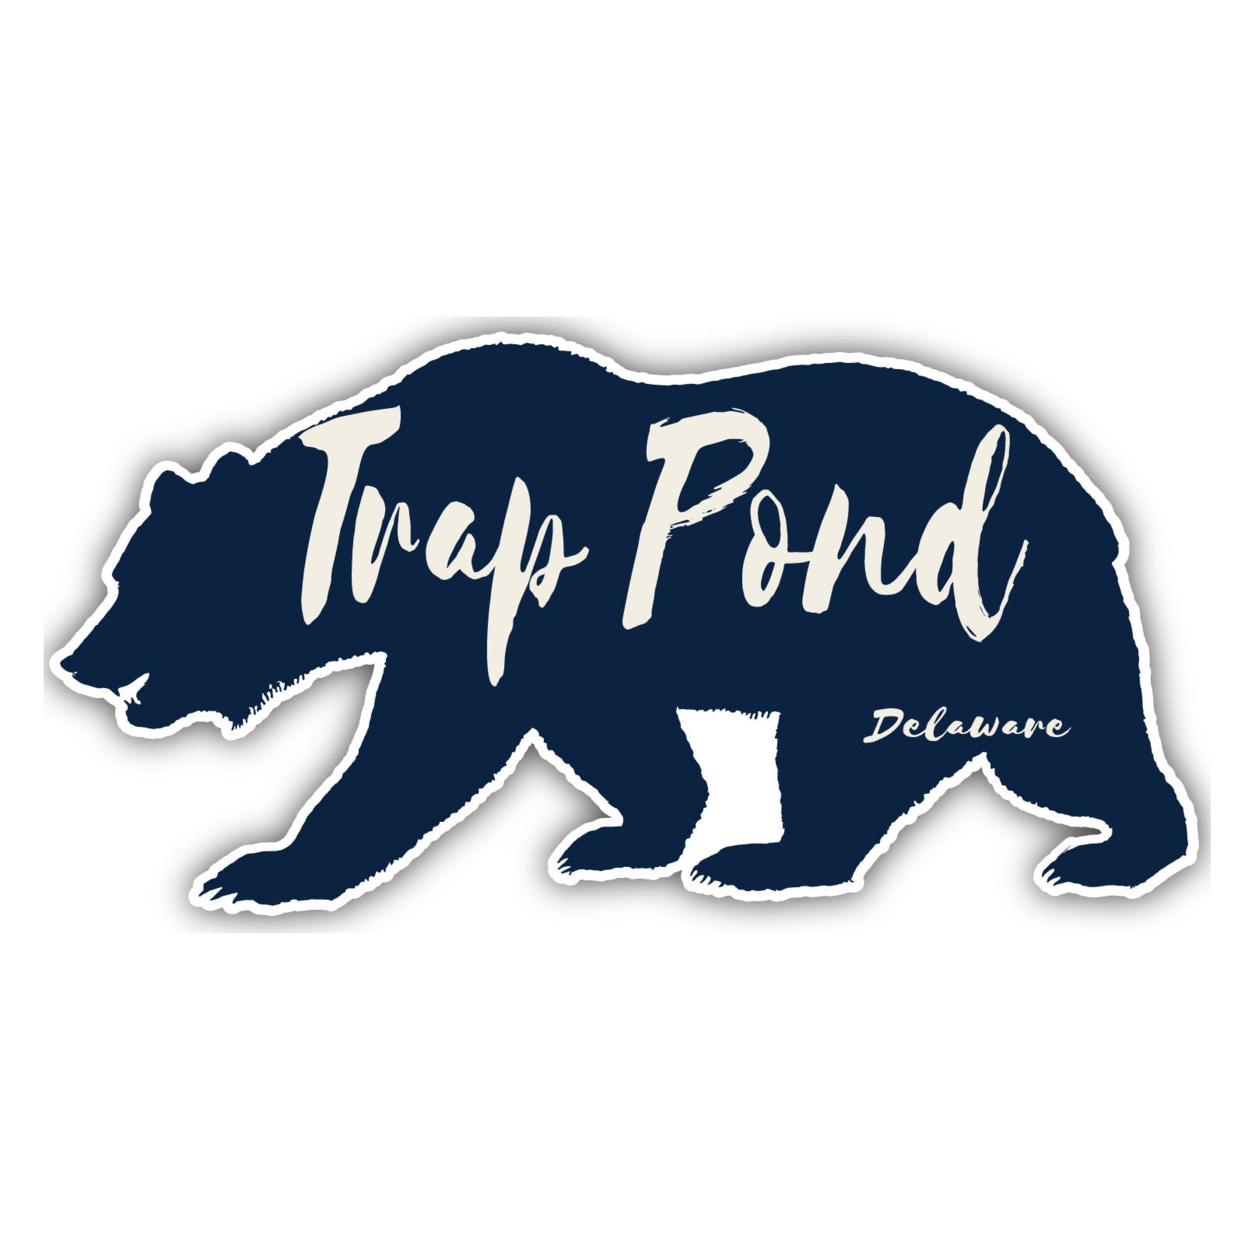 Trap Pond Delaware Souvenir Decorative Stickers (Choose Theme And Size) - Single Unit, 4-Inch, Great Outdoors